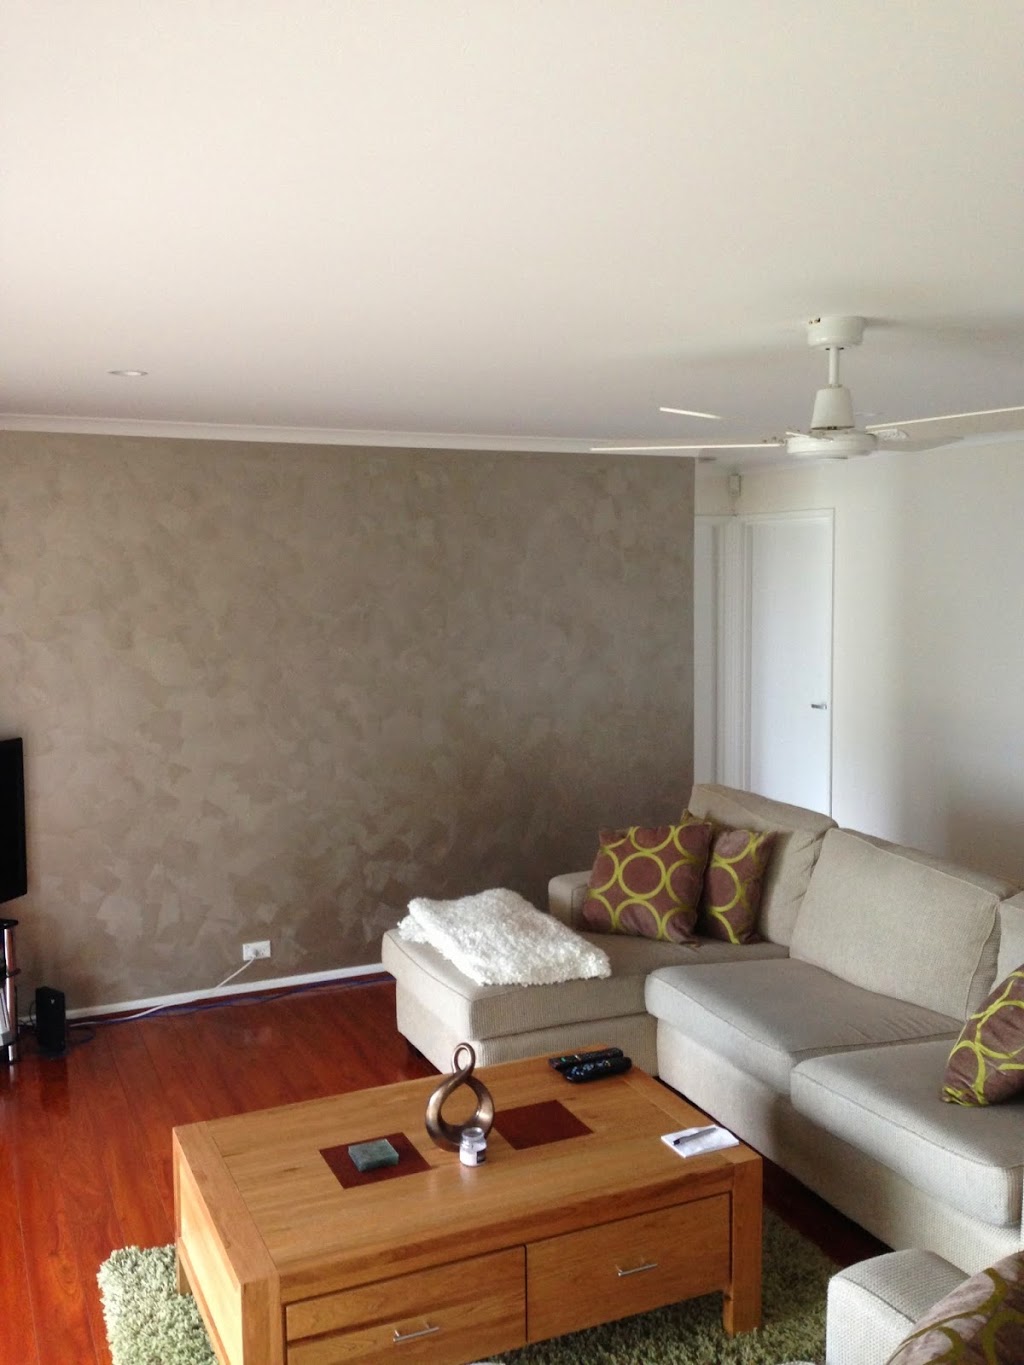 All Coat Painting | painter | 19 Balee Ave, Adelaide SA 5158, Australia | 0439689556 OR +61 439 689 556